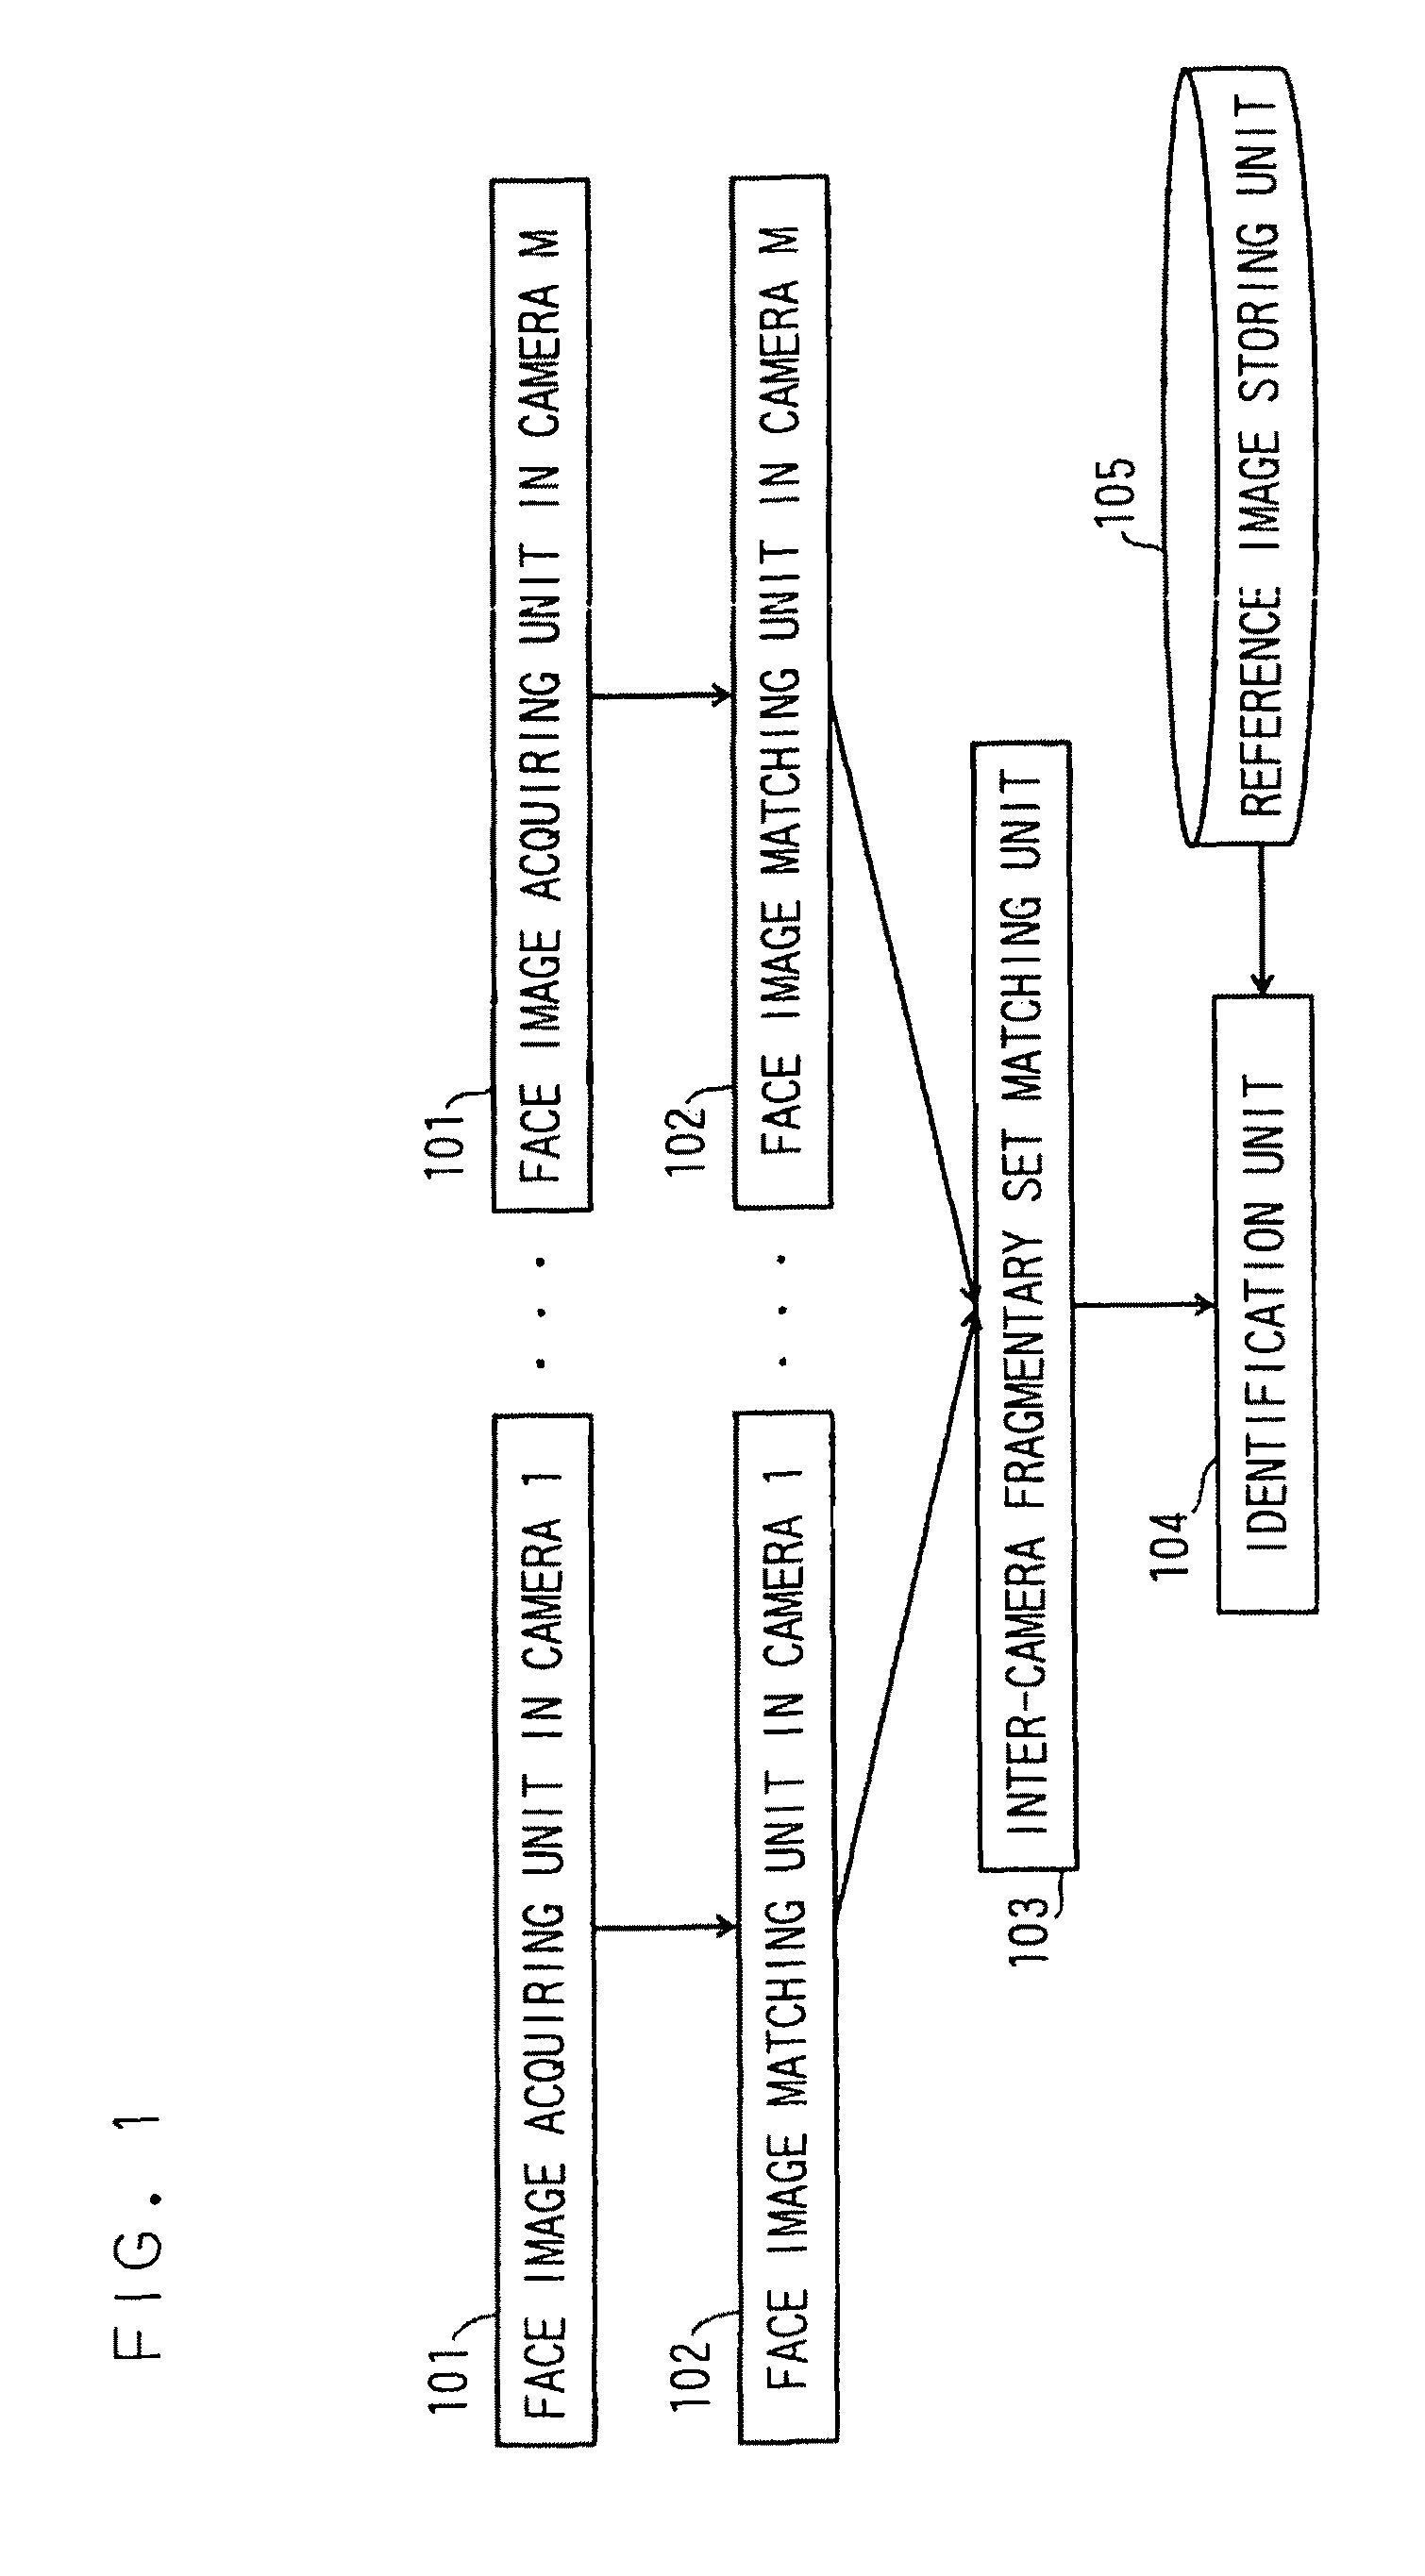 Face recognition apparatus and face recognition method